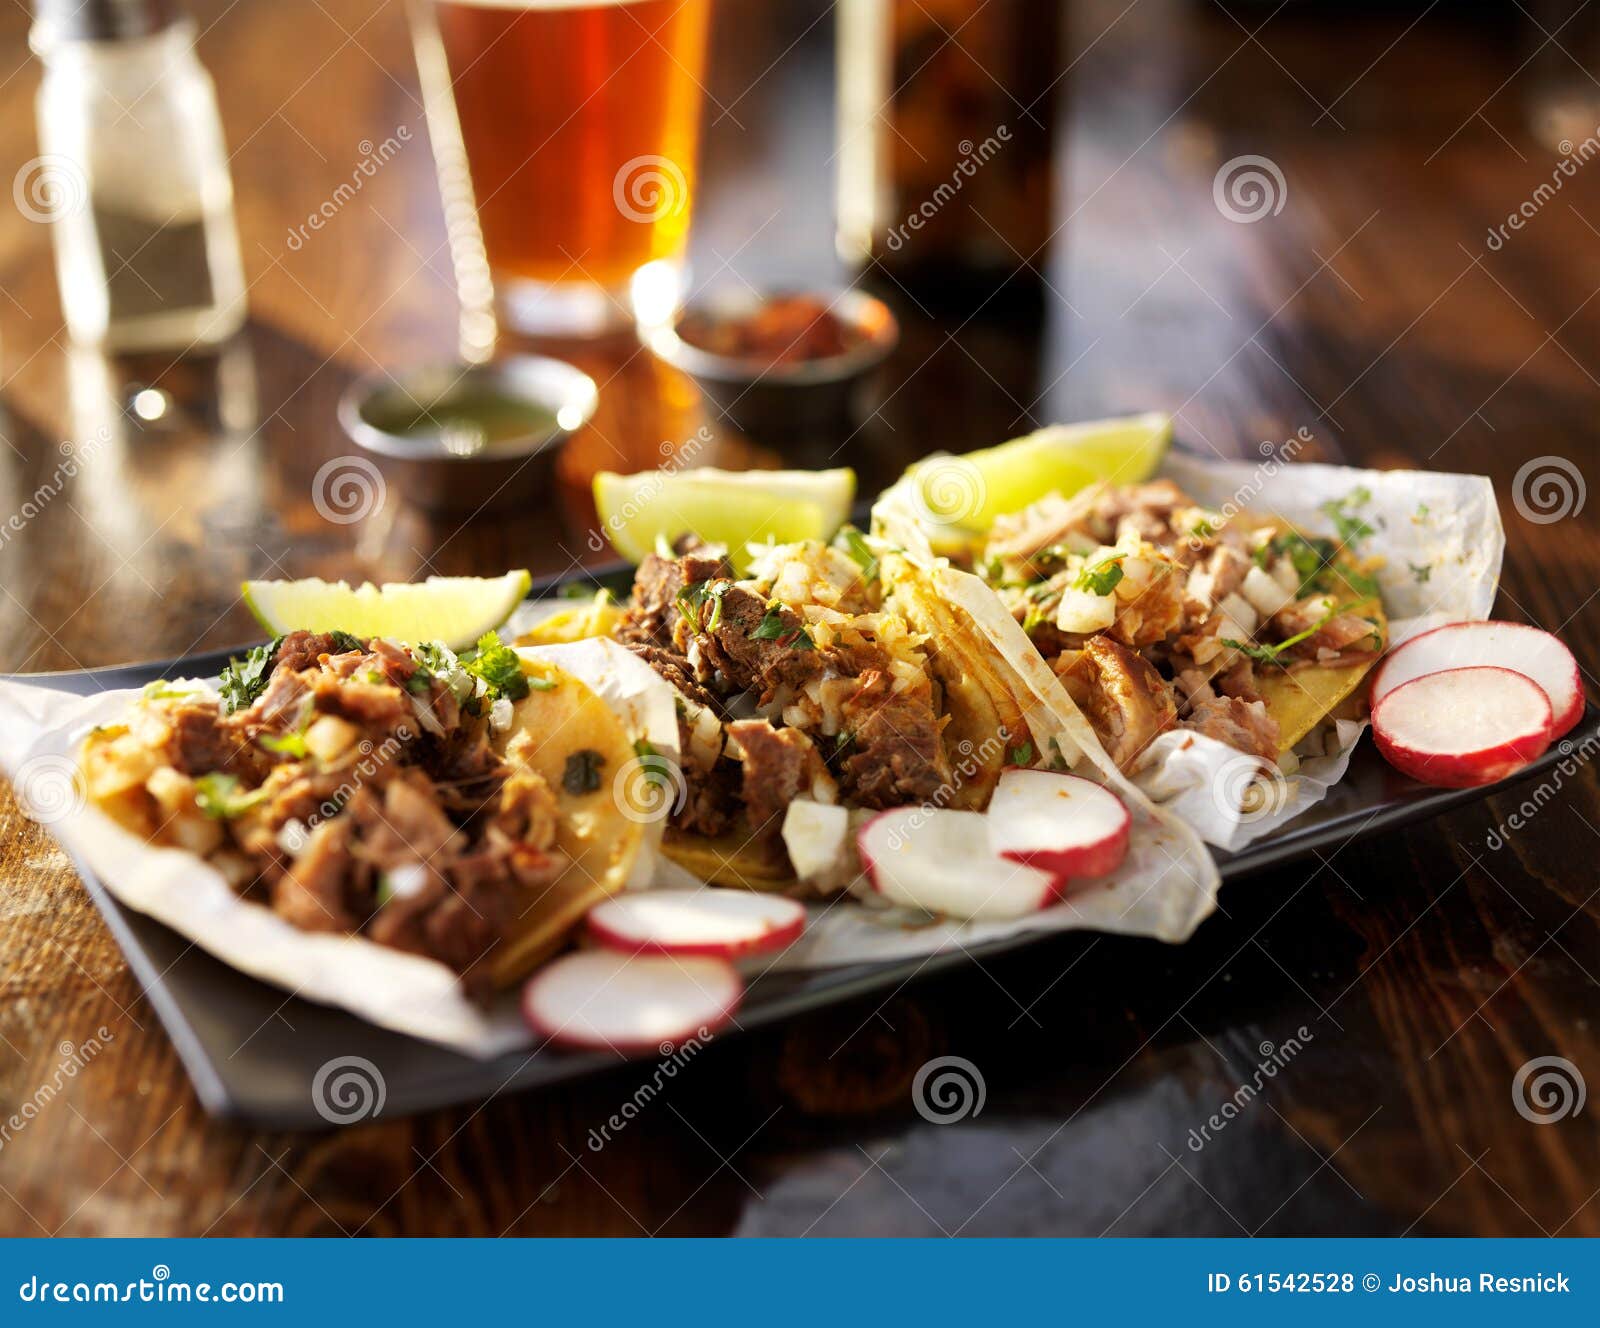 three tacos with beer